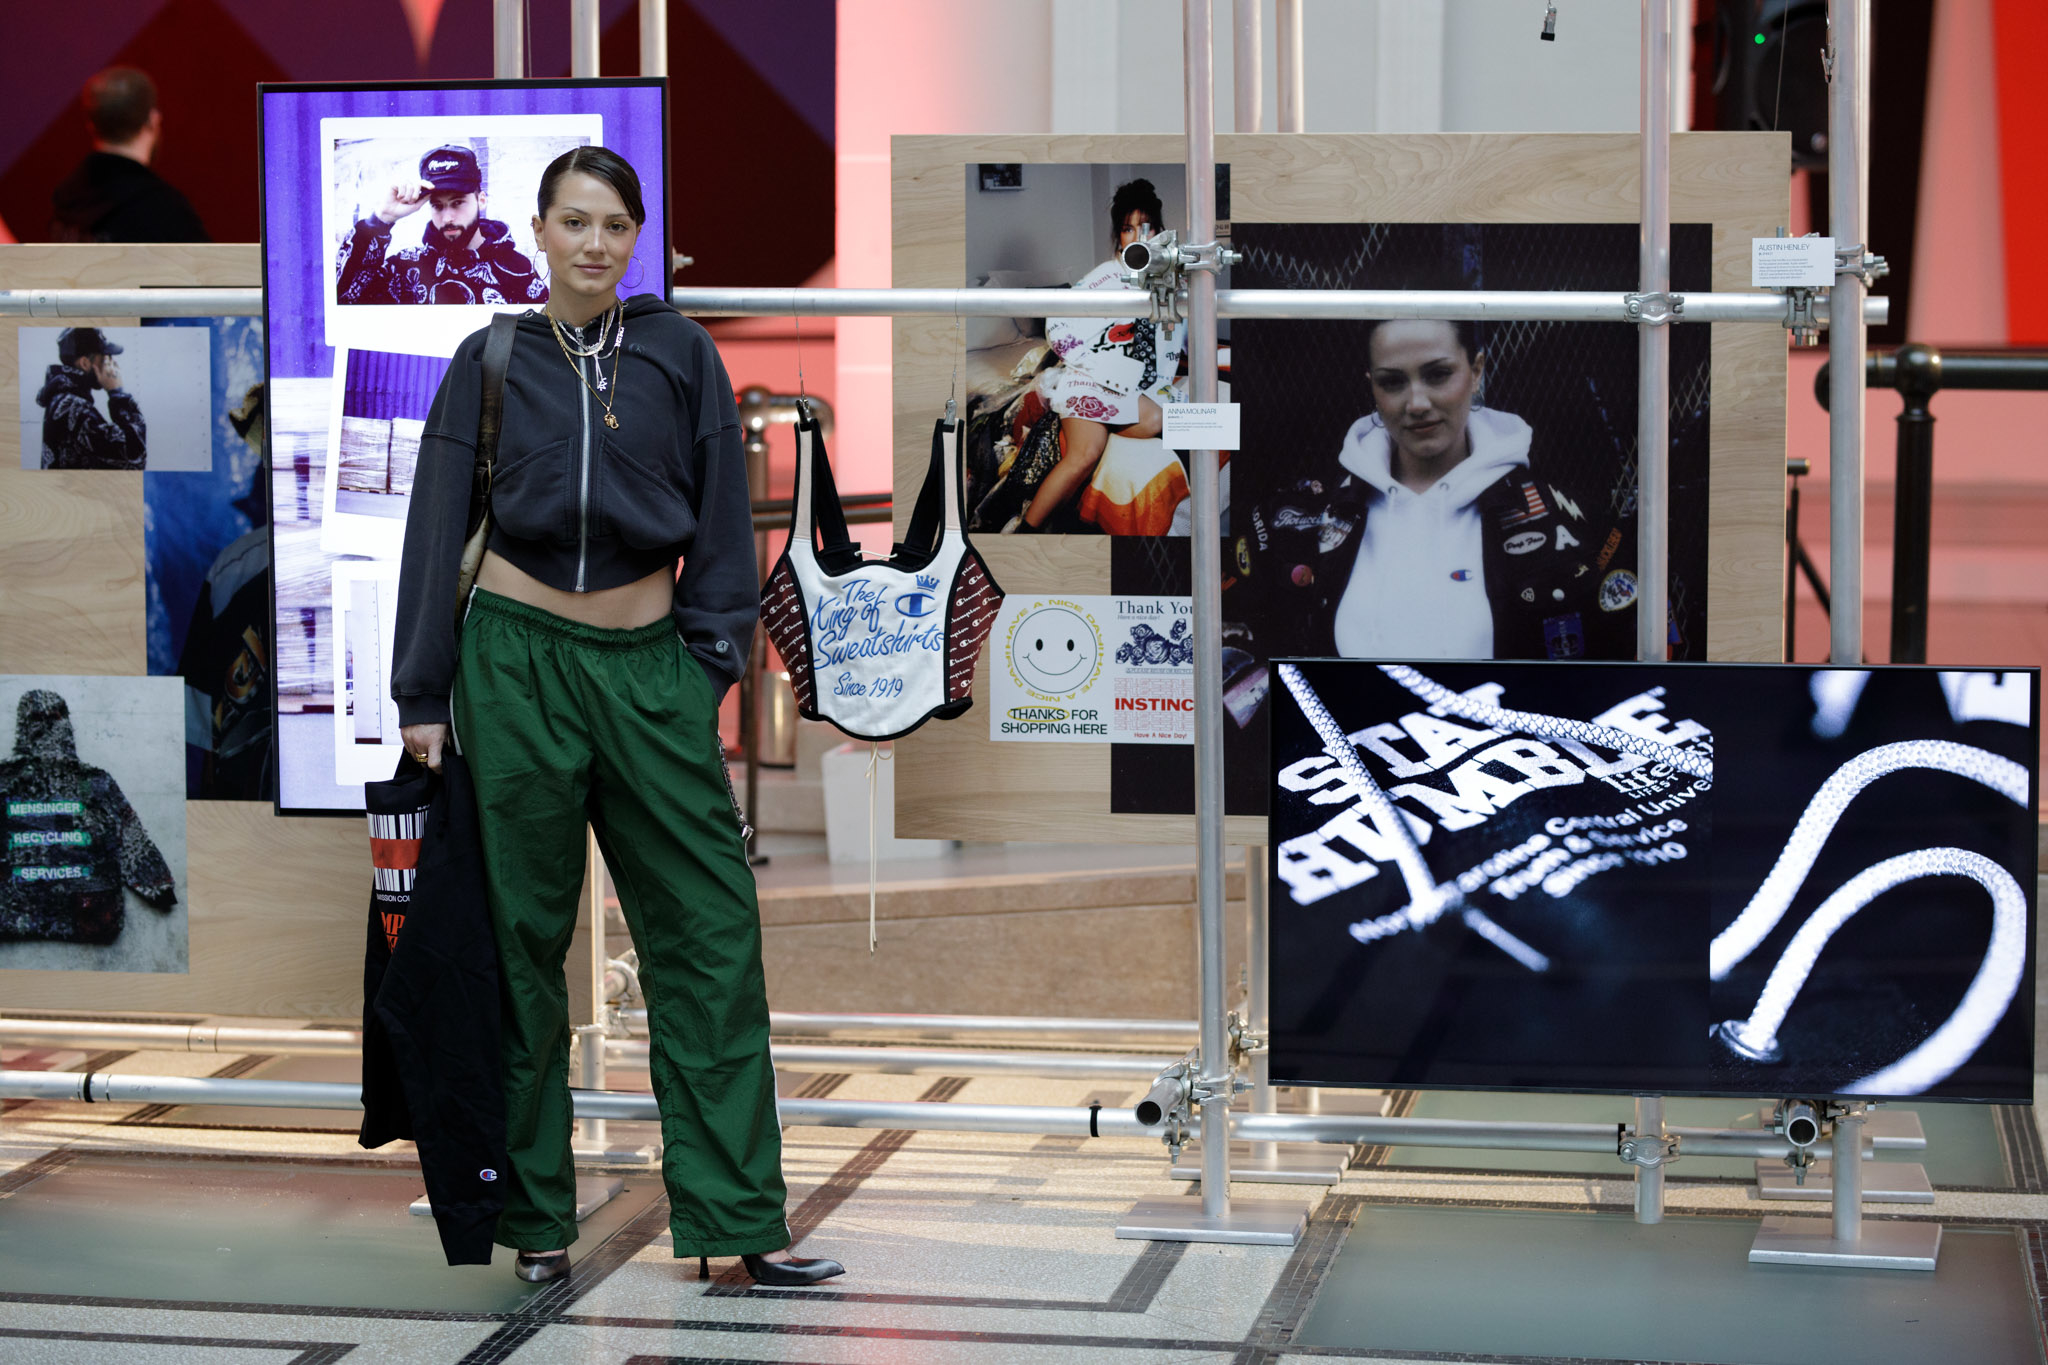 Bella Hadid poses at a fashion exhibition, wearing a cropped hoodie and green cargo pants. Various fashion displays and images surround her in the background